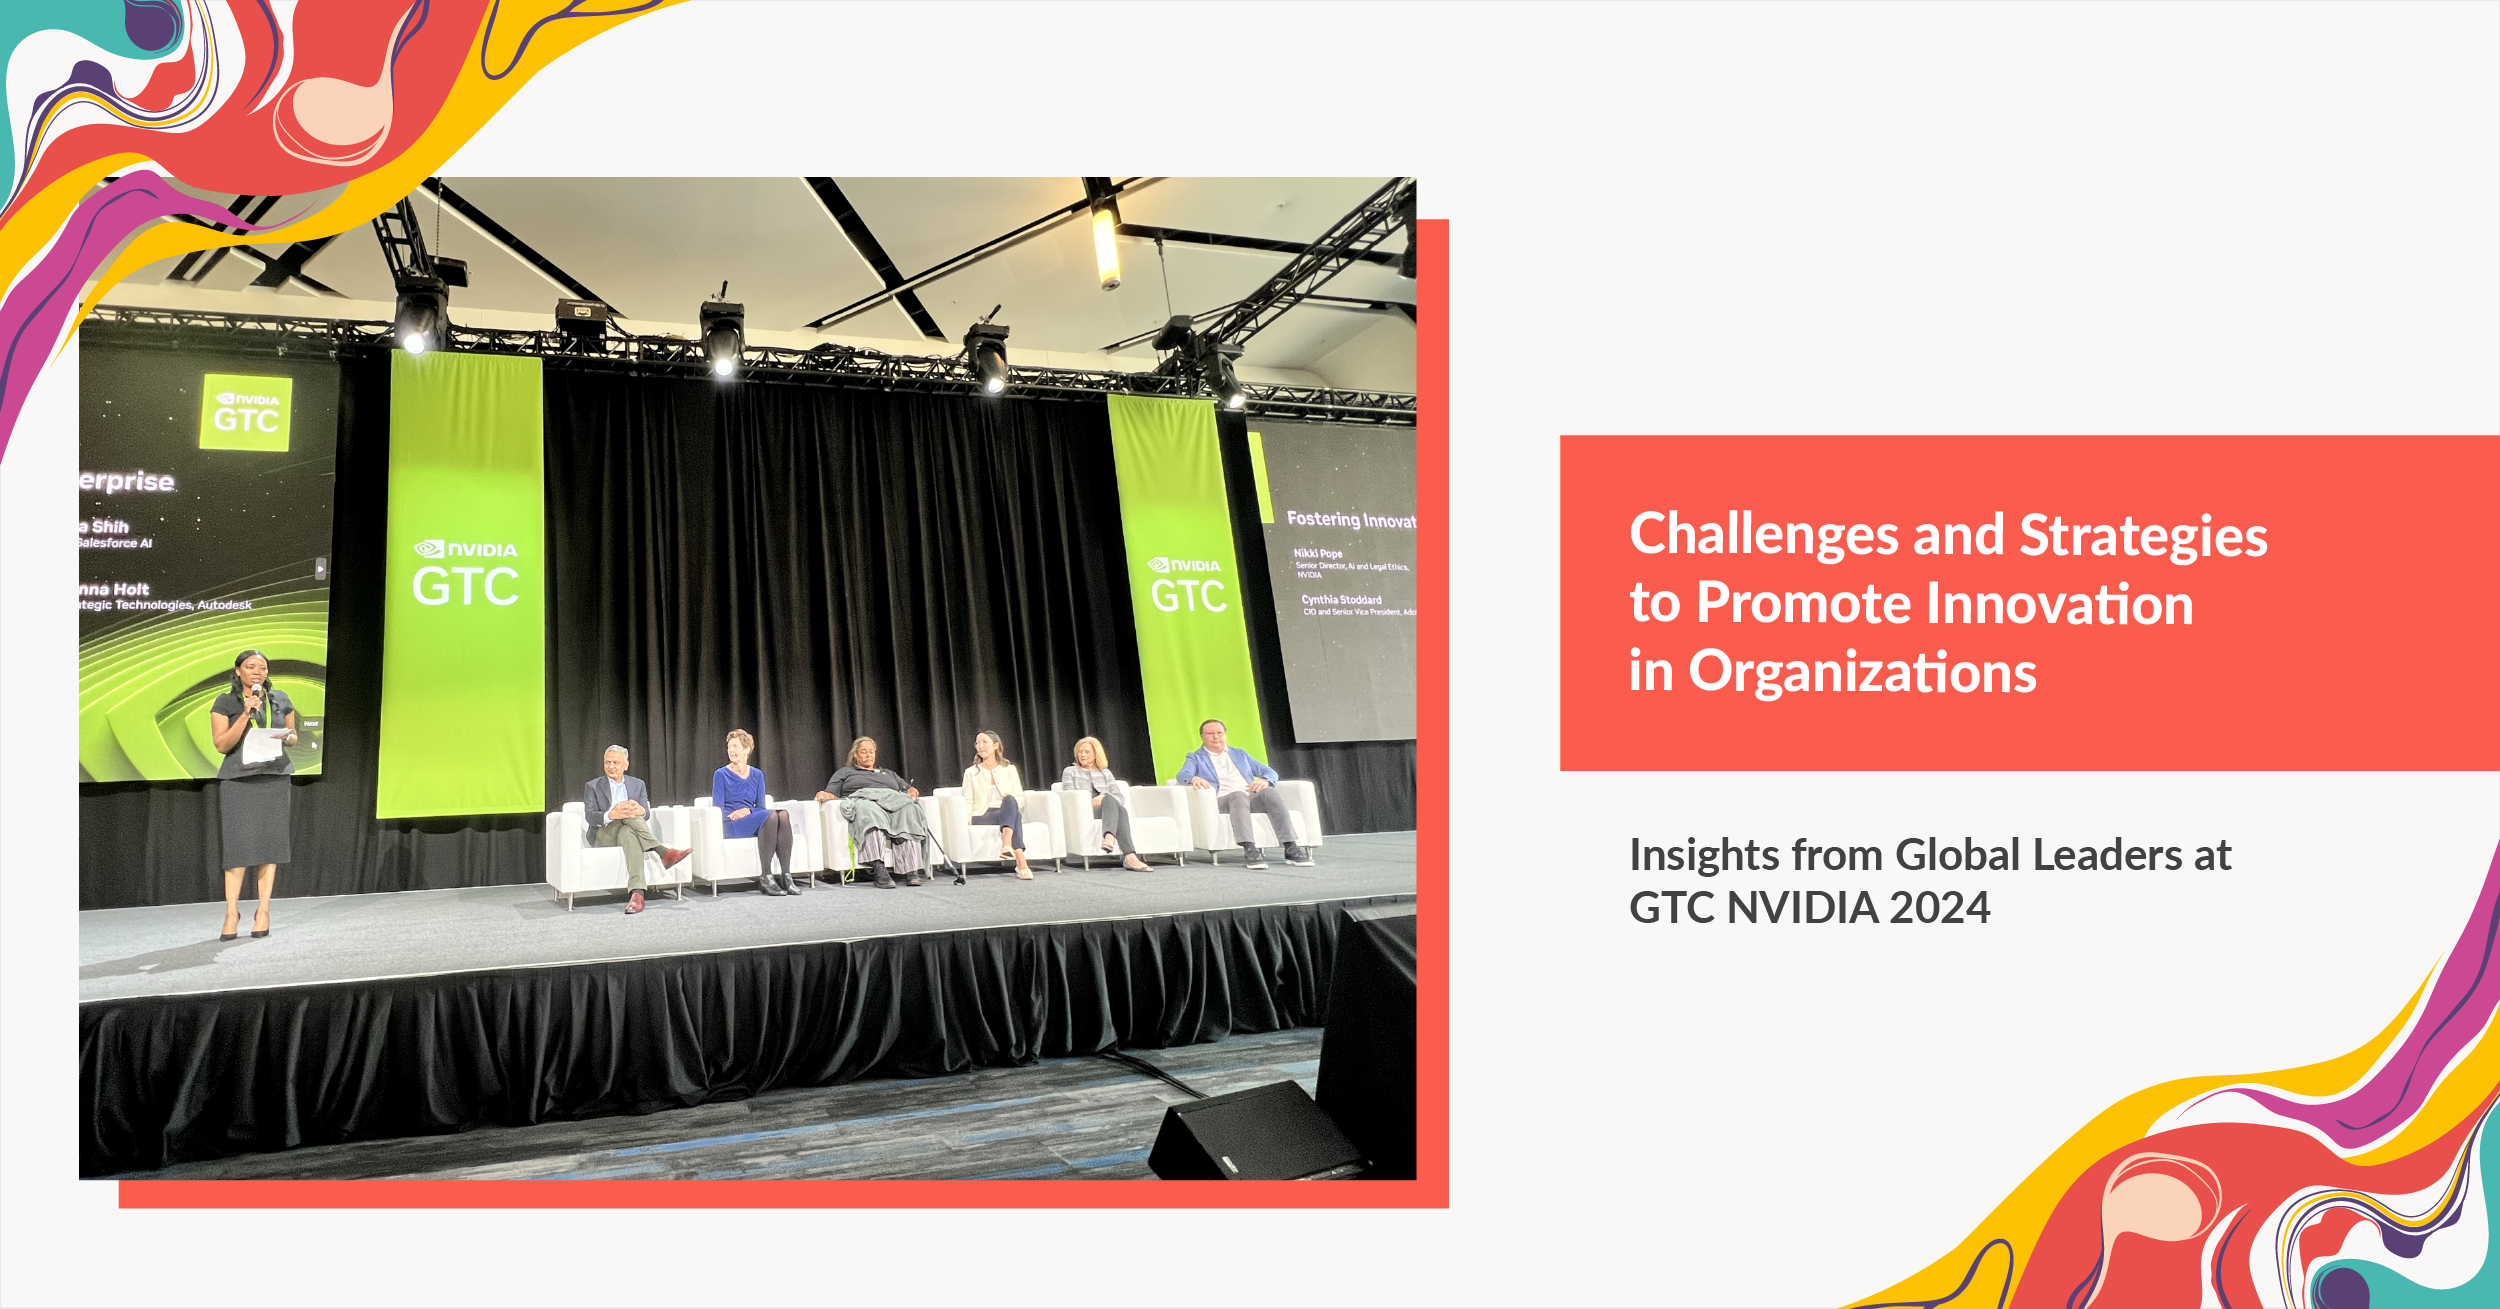 Challenges and Strategies to Promote Innovation in Organizations: Insights from Global Leaders at GTC NVIDIA 2024